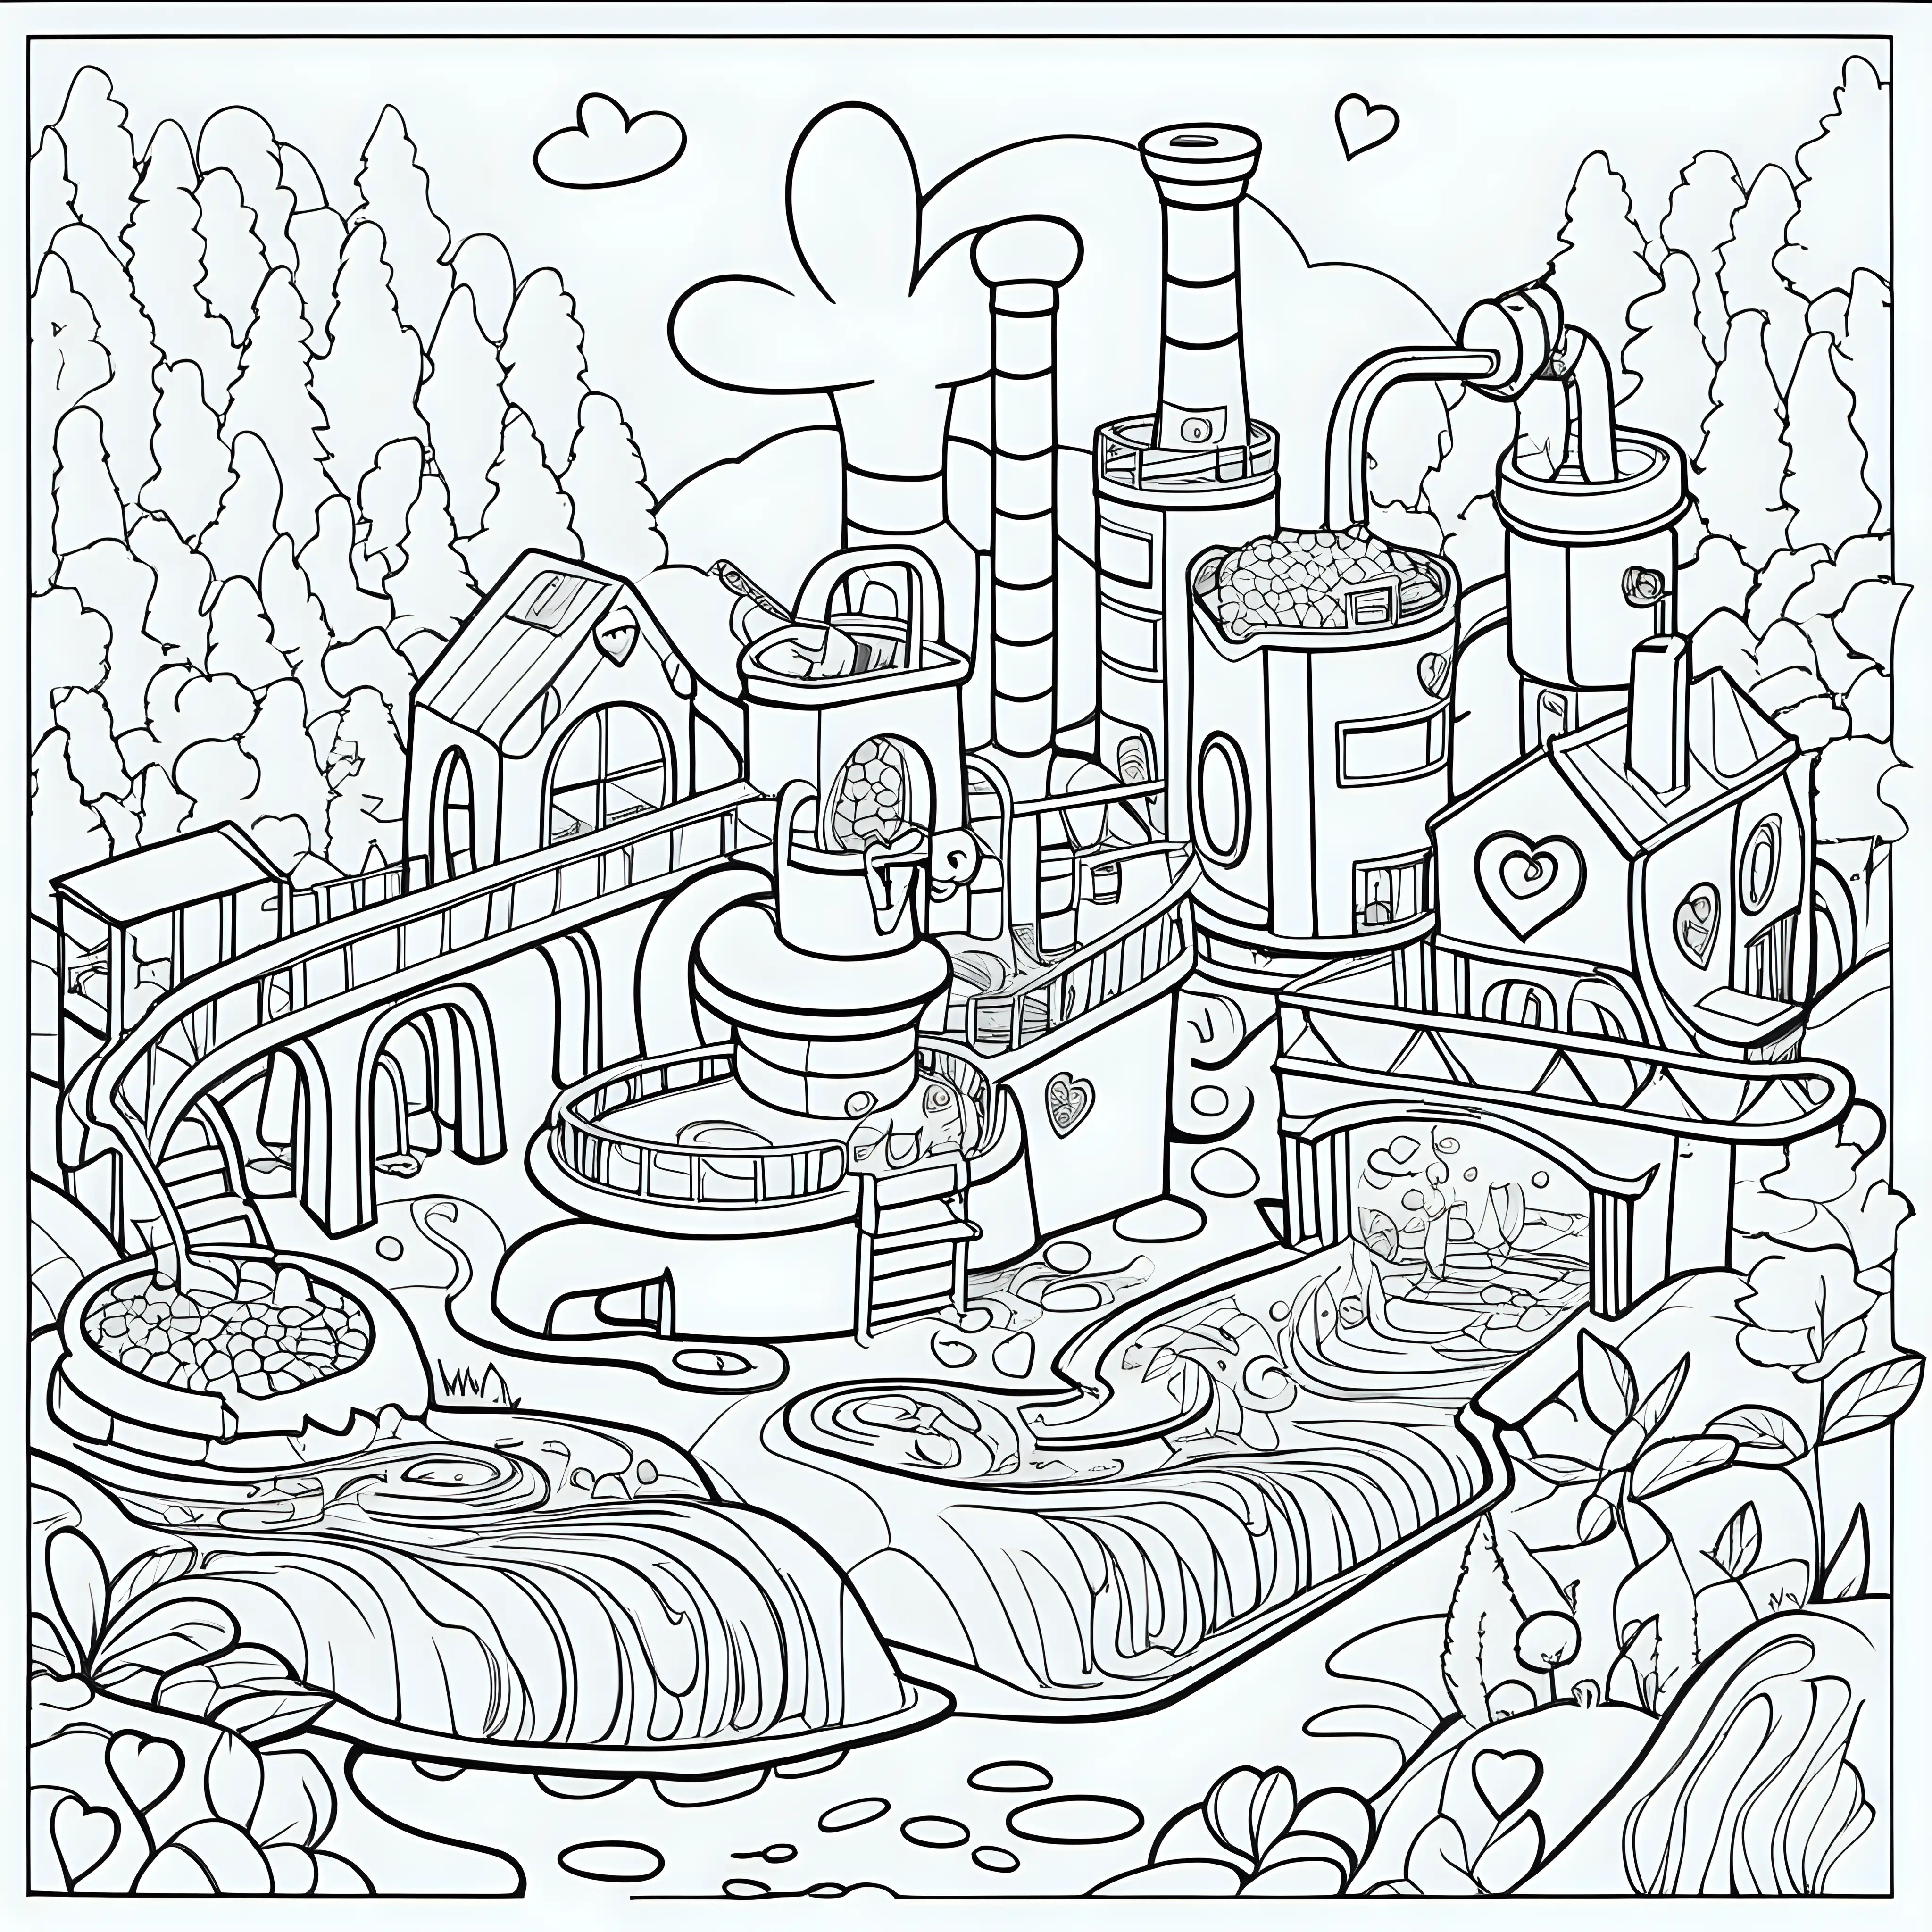 Create a coloring book page Chocolate Factory: A whimsical chocolate factory with chocolate rivers and heart-shaped molds. Use crisp lines and white background. Make it an easy-to-color design for children. --ar 17:22--model raw